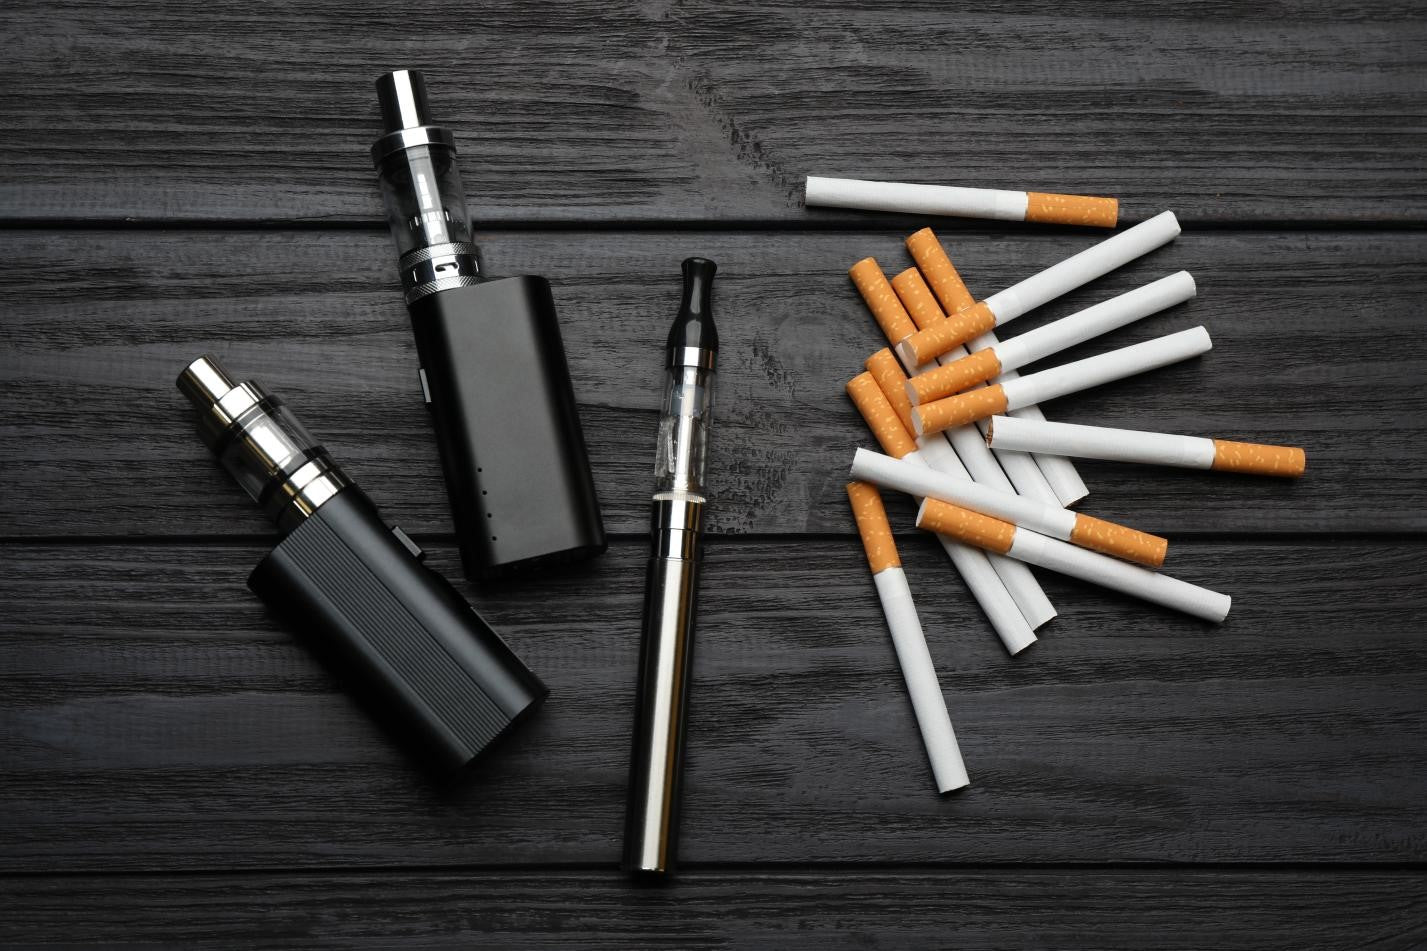 Vape vs. Cigarettes: Is Vaping a Good Way to Quit Smoking?